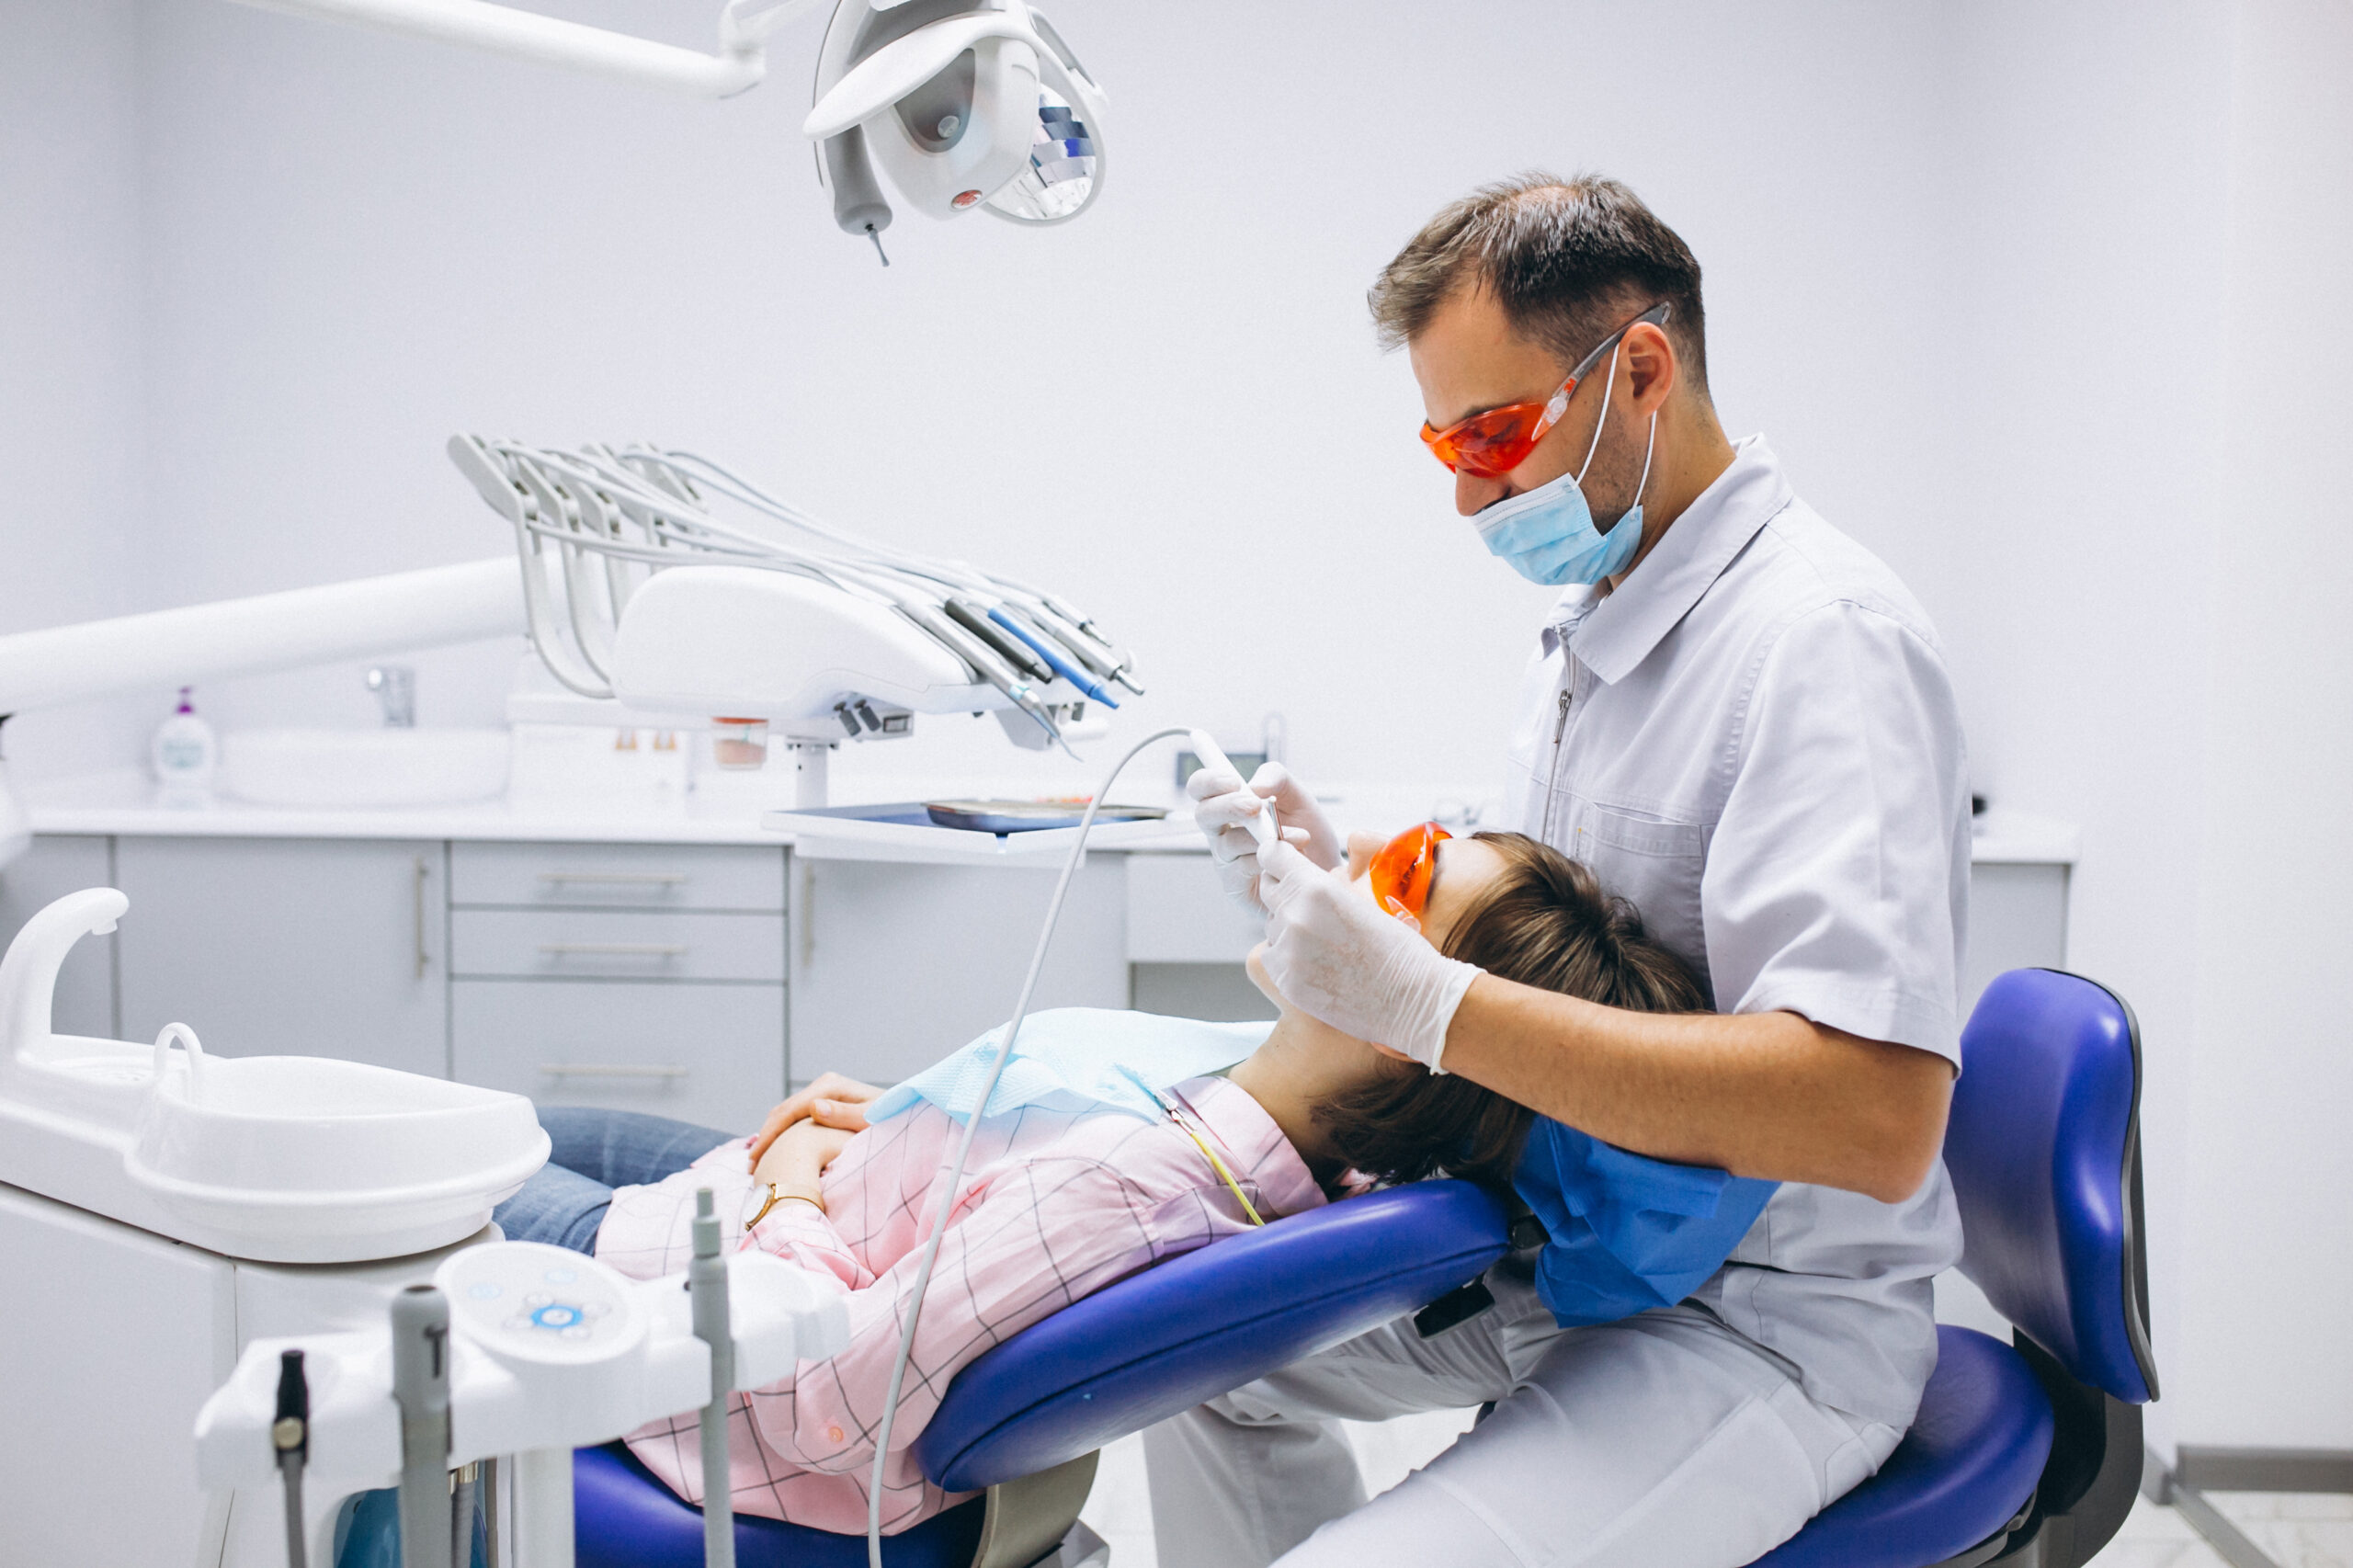 Insight into the rising trend of dental implant tourism, showcasing the growing preference for combining health care needs with vacation experiences, highlighting affordable, high-quality dental services and cultural exploration opportunities."